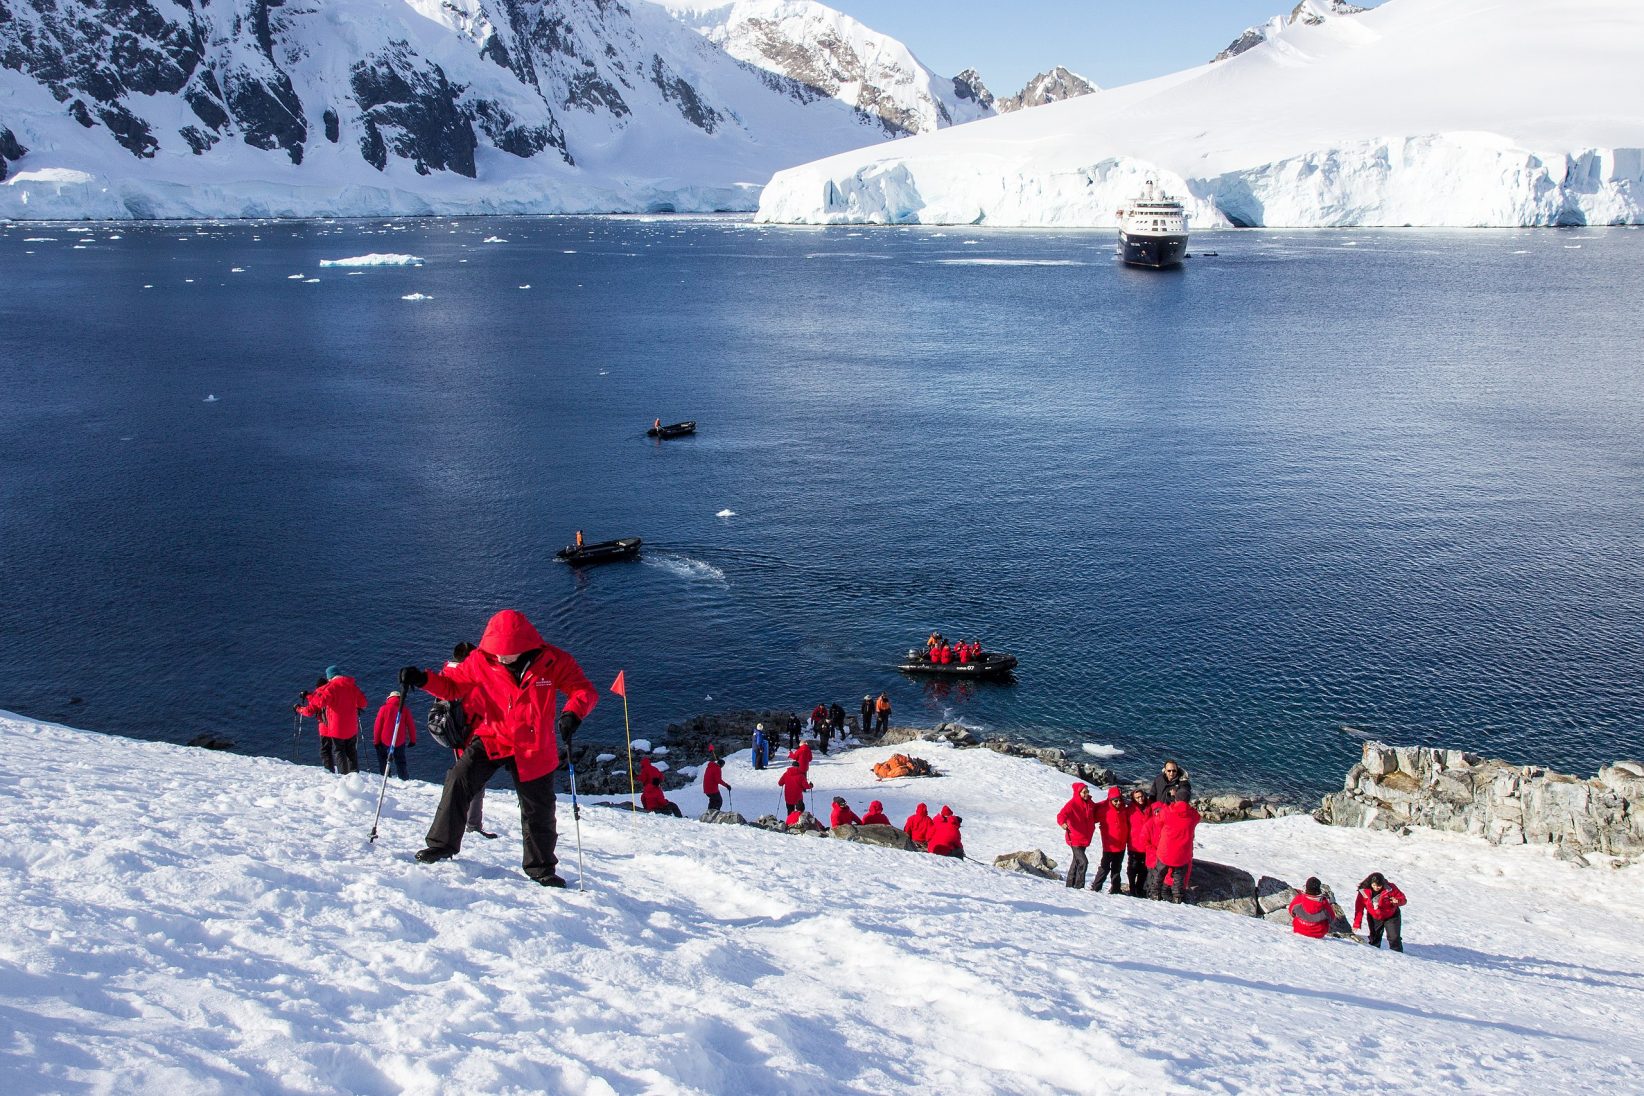 Silversea Silver Cloud expedition cruise to the South Shetland Islands and Antarctica Peninsula in March 2019. Source: Gary Bembridge/http://bit.ly/3mpKEca